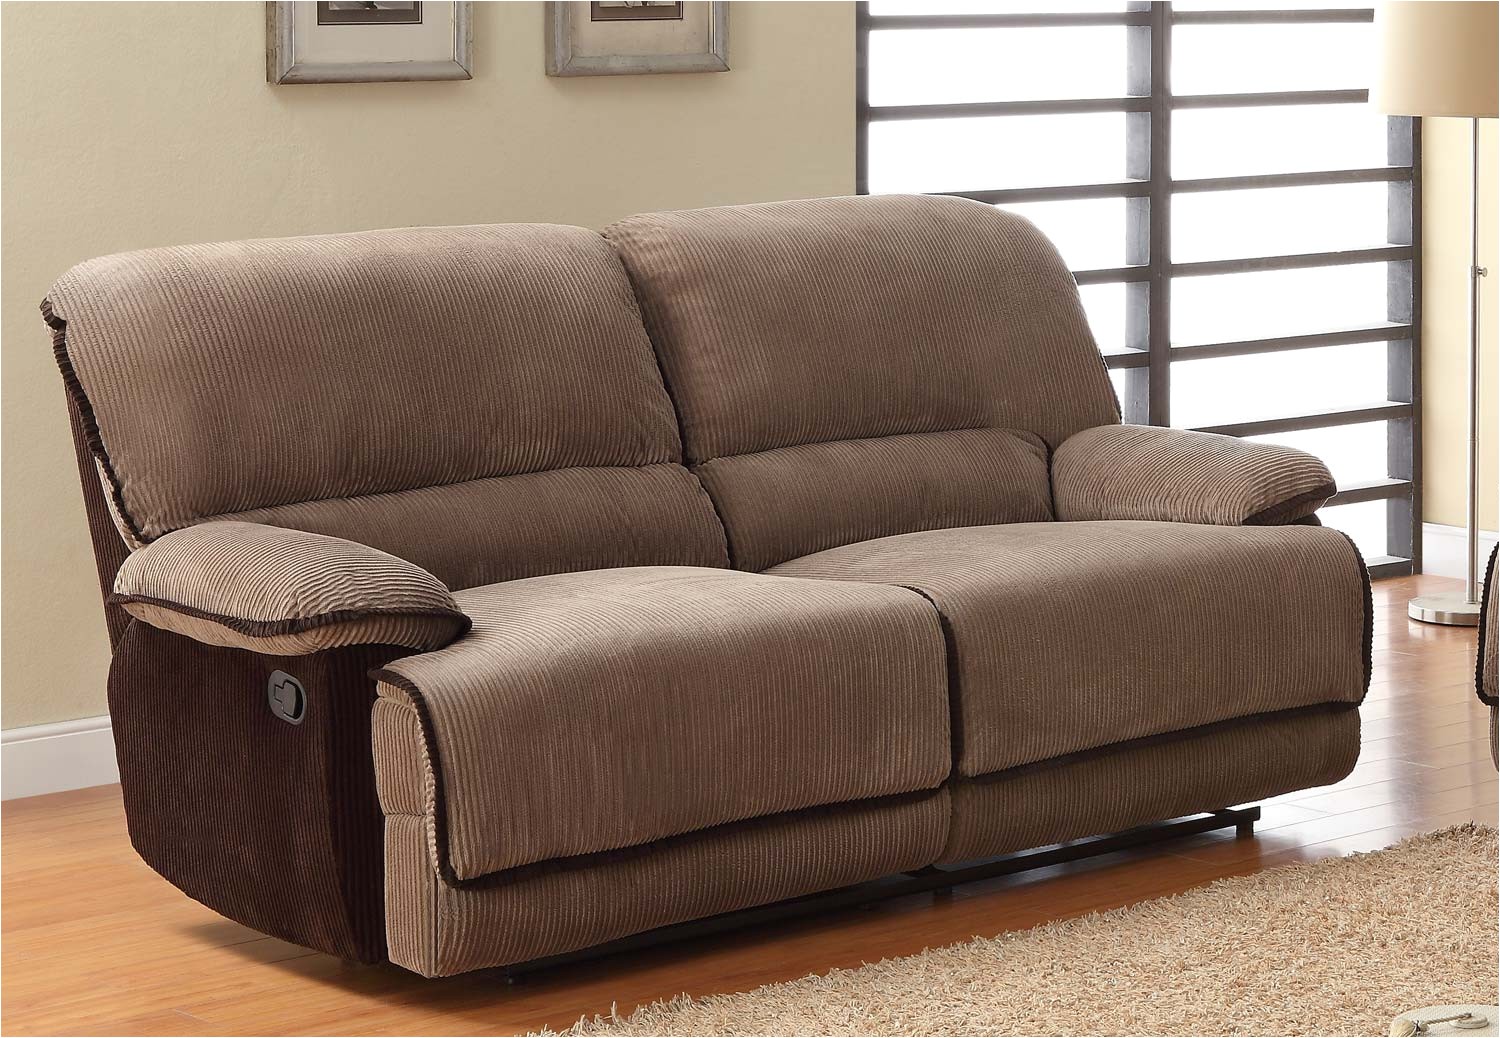 full size of singular dual reclining sofa picture ideas with center console slipcover covers drop down